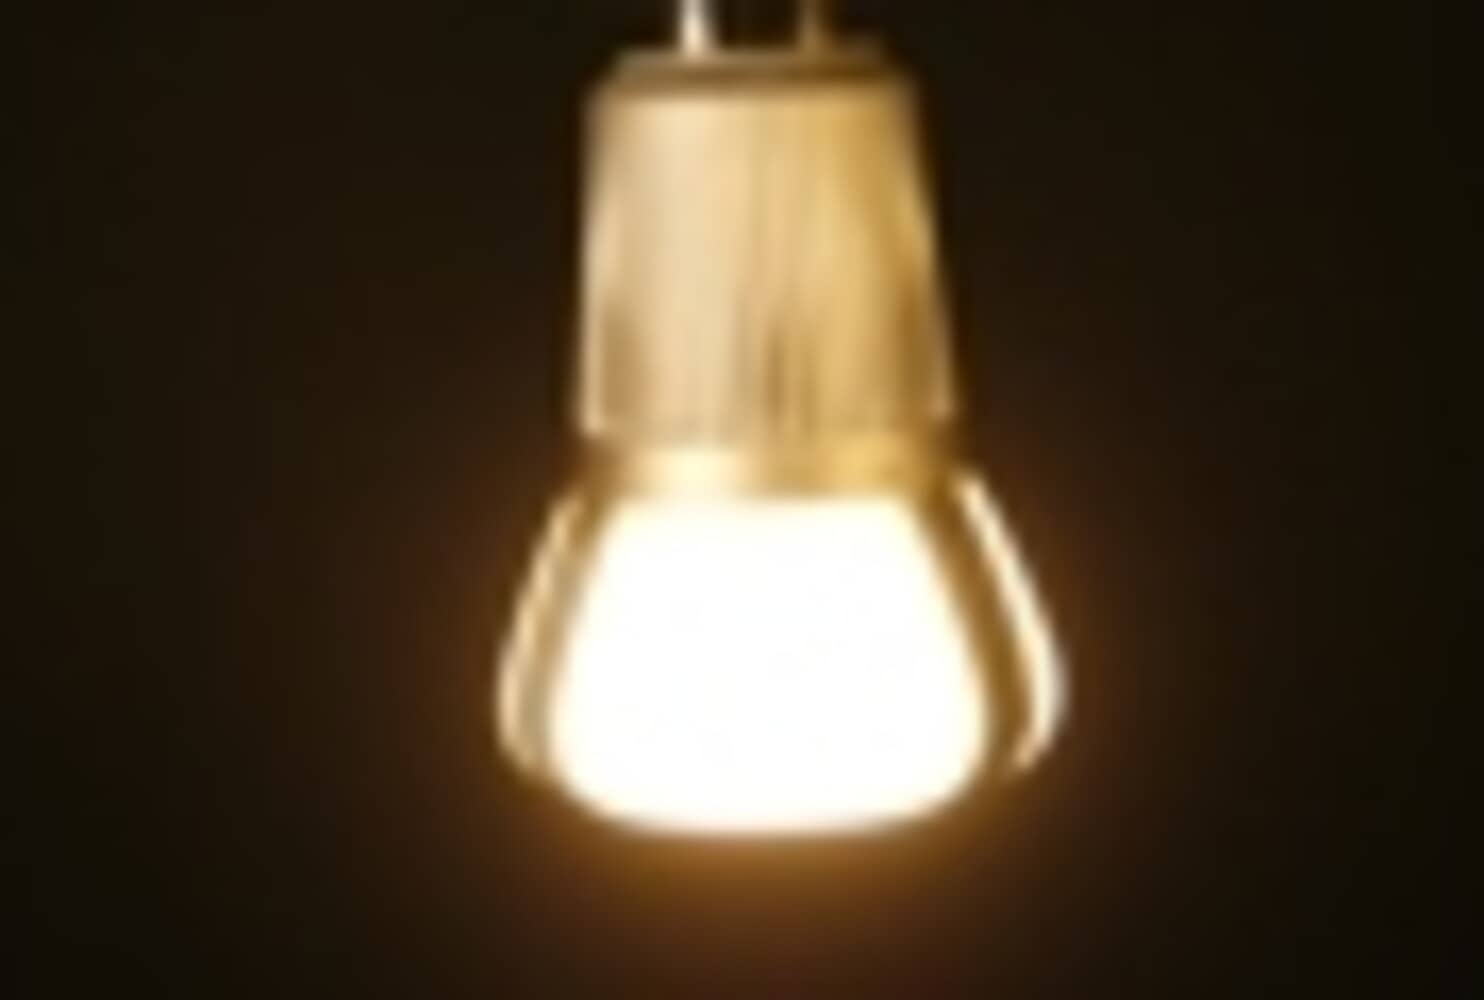 Uncovering the Truth: Why are Light Bulbs so Expensive?